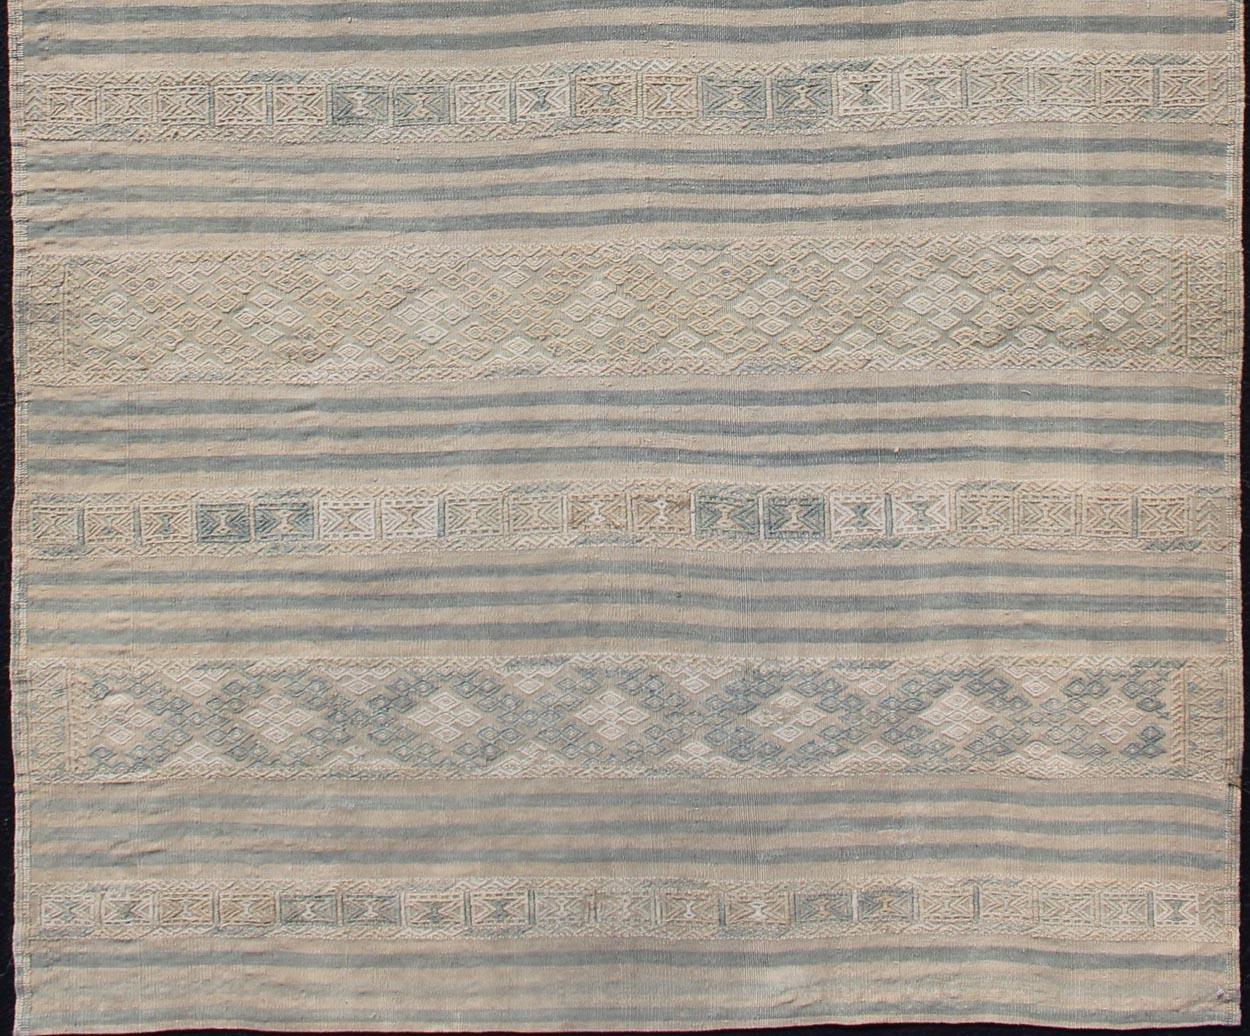 Turkish Flat-Weave Kilim with Embroideries in Taupe, Tan, Blue and Gray For Sale